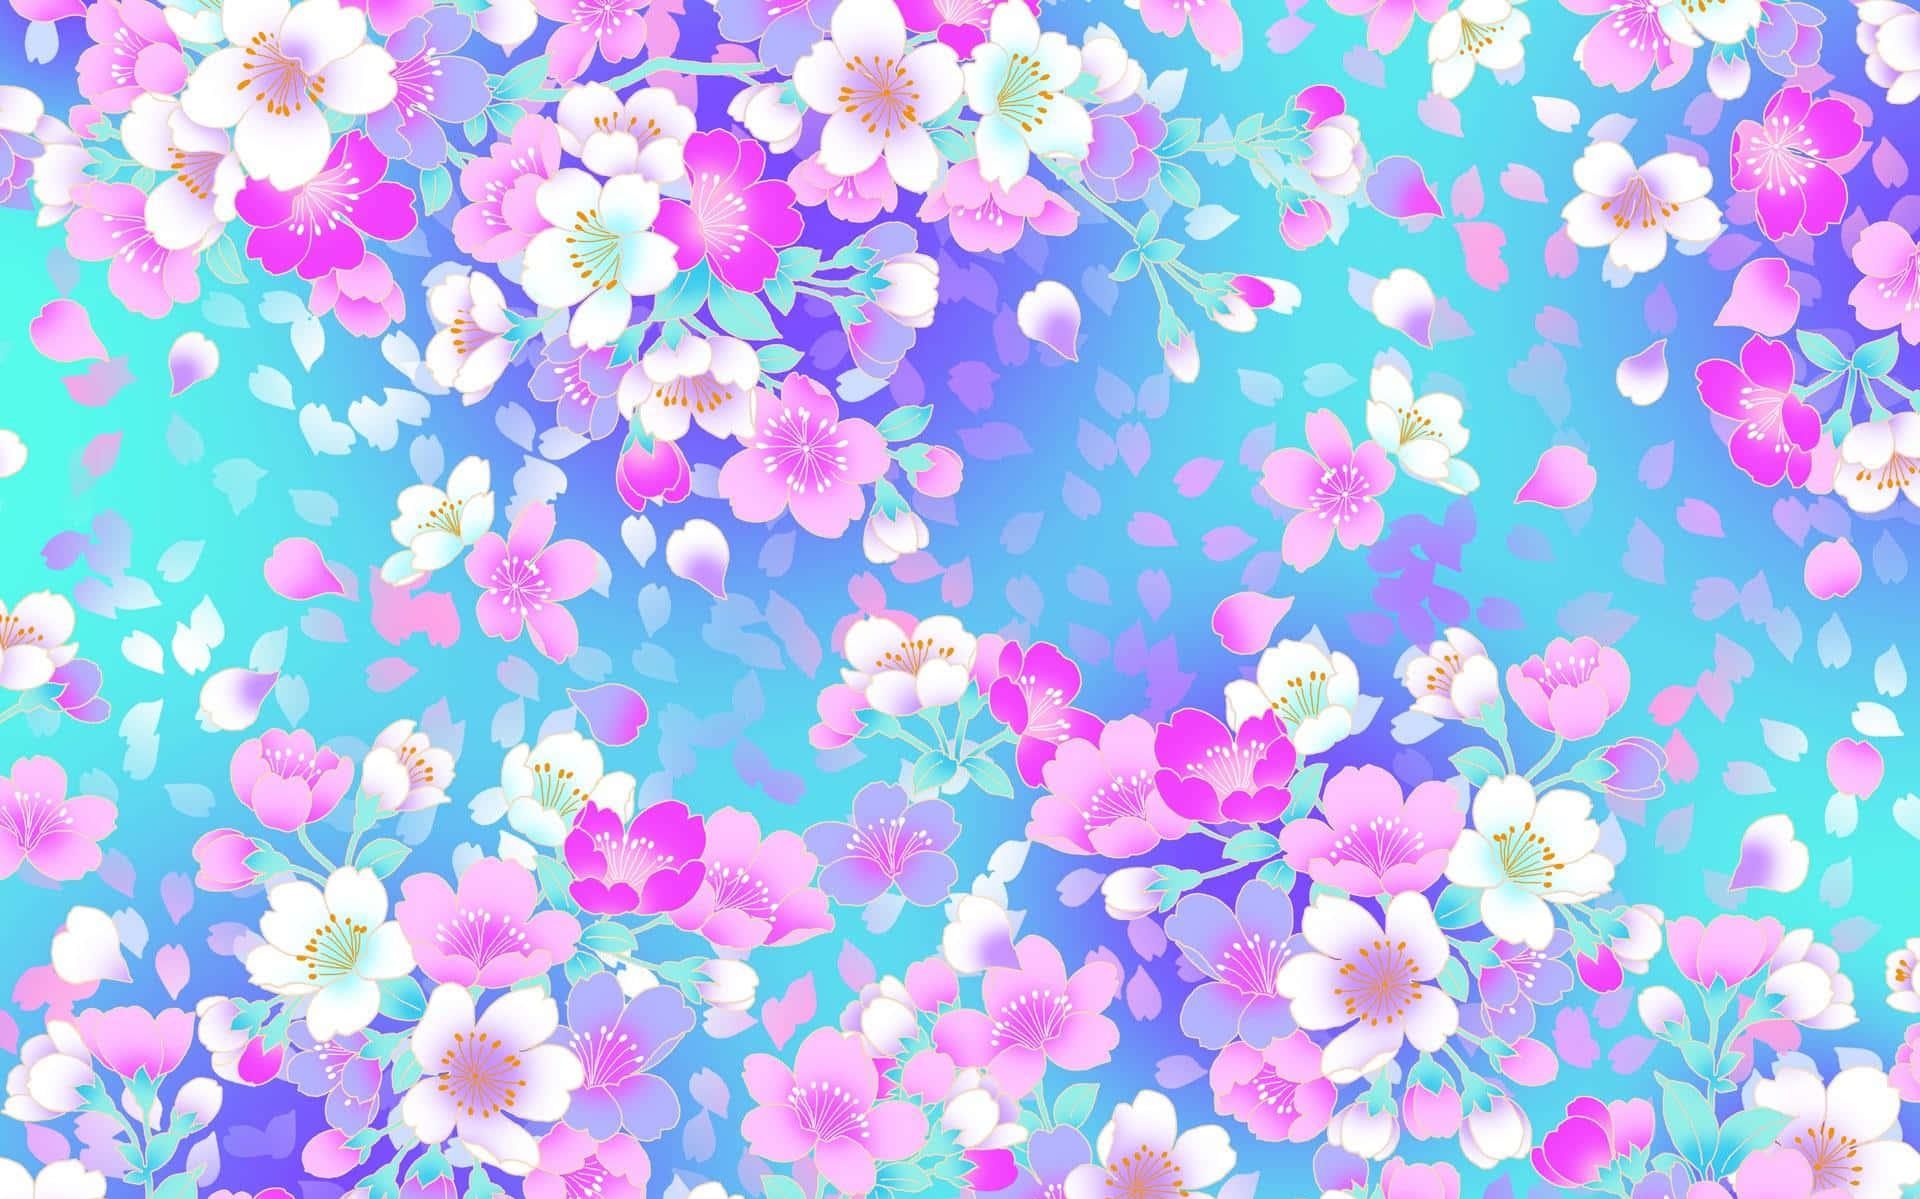 Download Adorable Kawaii Flower Bringing Joy and Vibrance to Your